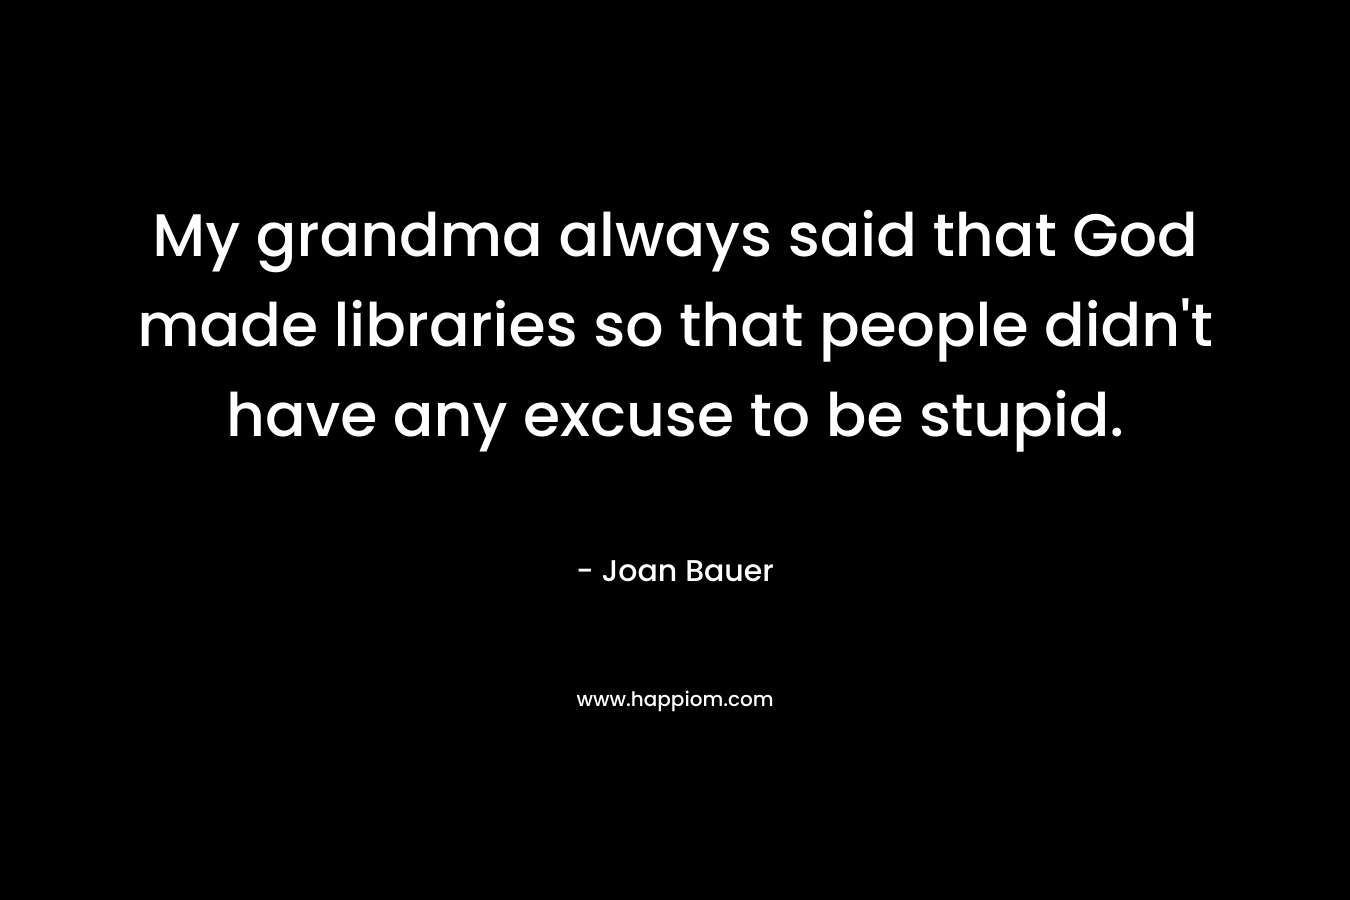 My grandma always said that God made libraries so that people didn't have any excuse to be stupid.